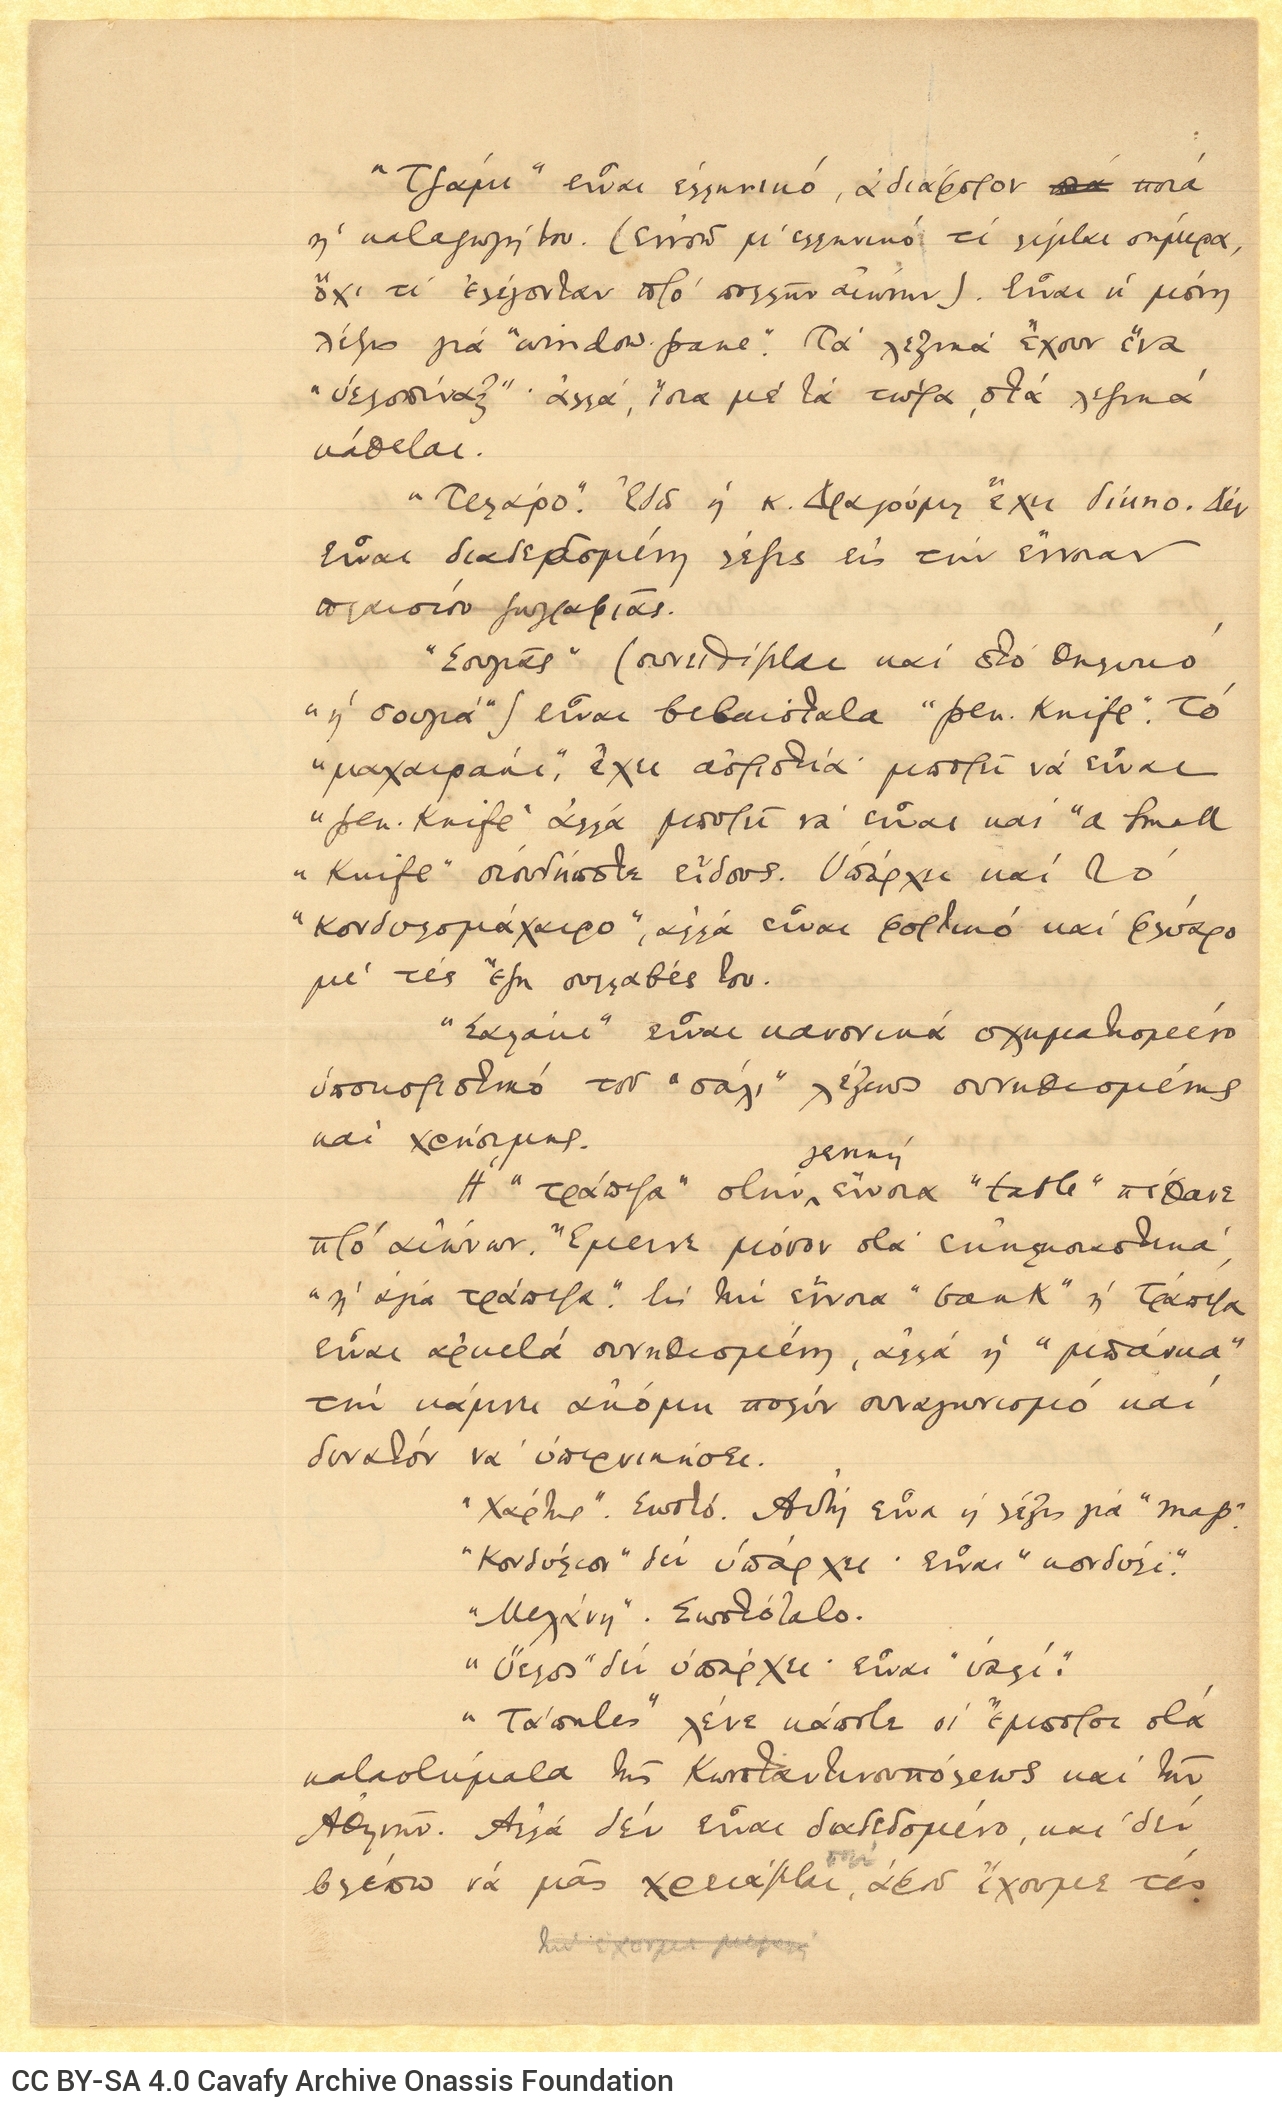 Handwritten prose text written on one sheet, with linguistic remarks and comments on specific words; endnotes in four piec